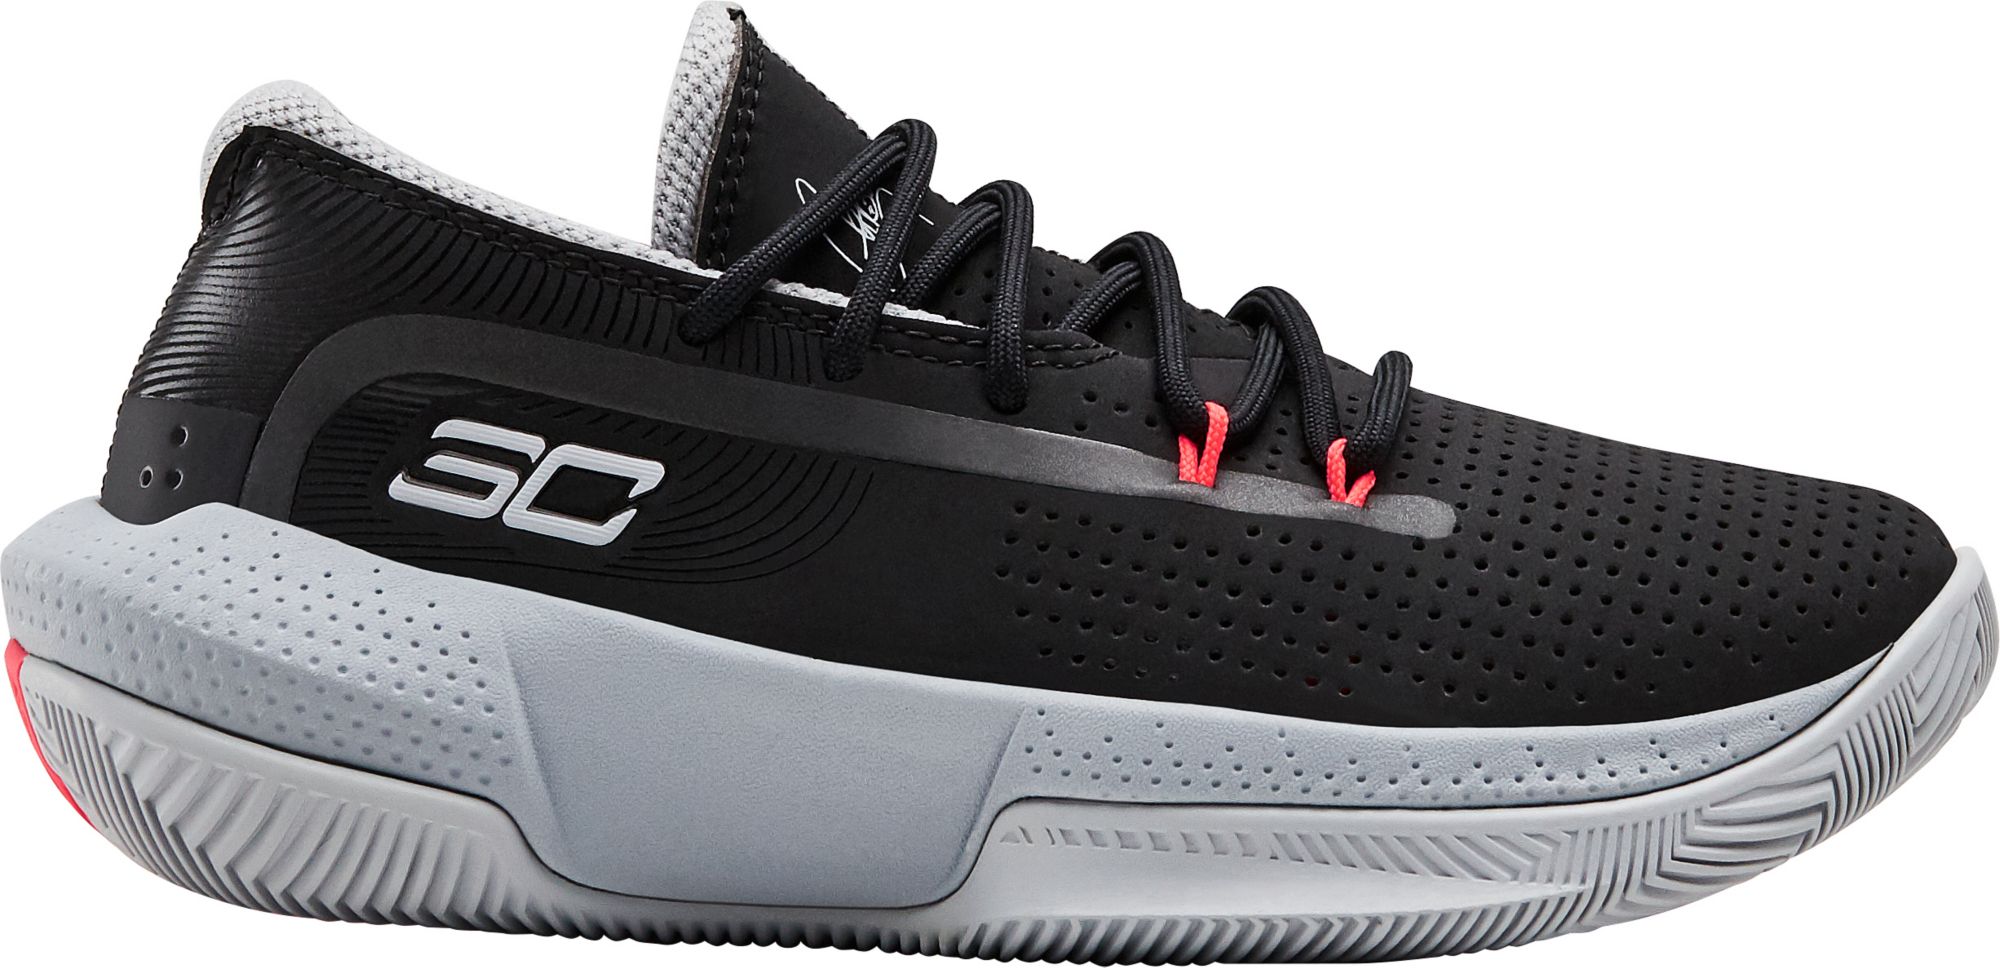 Curry 3Zer0 3 Basketball Shoes 